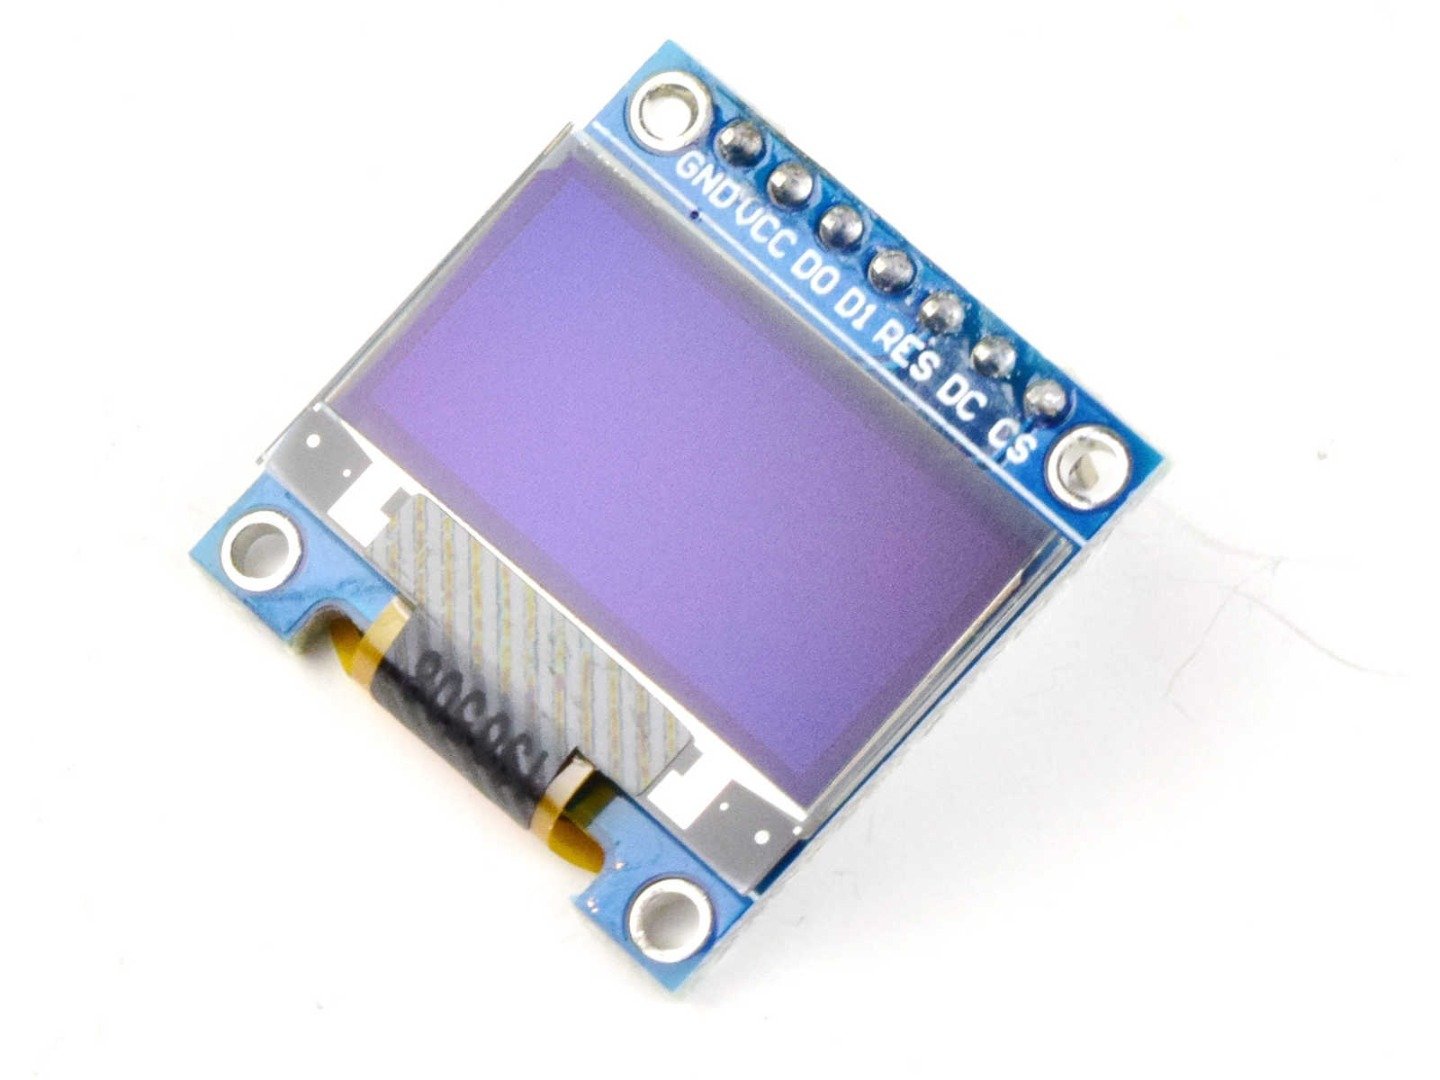 OLED Display 0.96 inch 128×64 with SPI interface – 3-5V (100% compatible with Arduino) 4